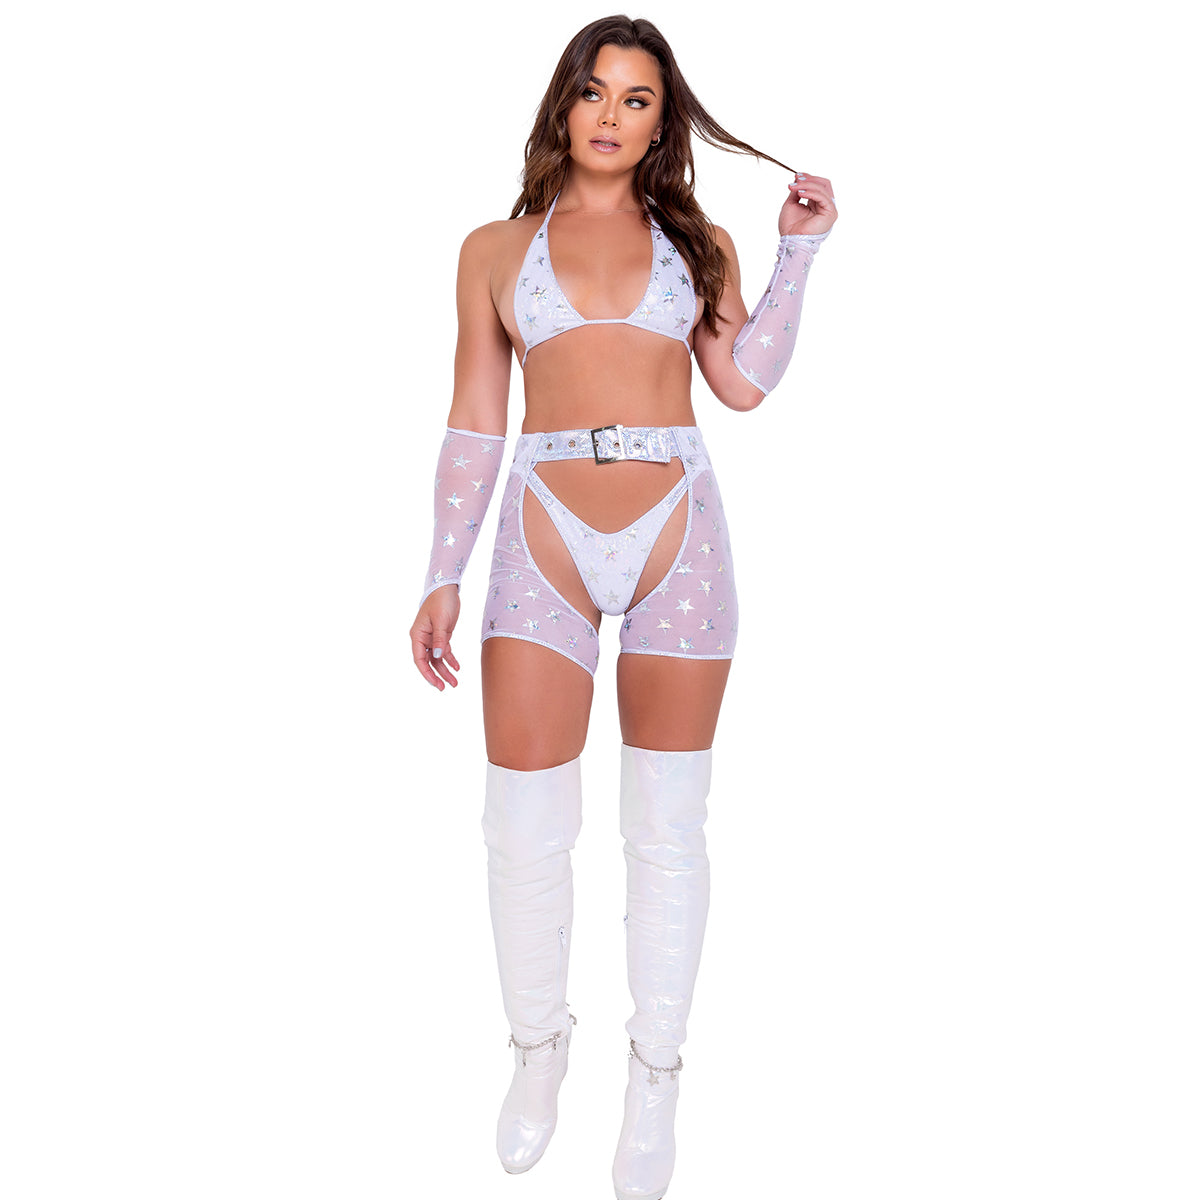 Stars Bikini Tie-Top White/Silver front view shown with Arm Guards 6163, and chaps 6063